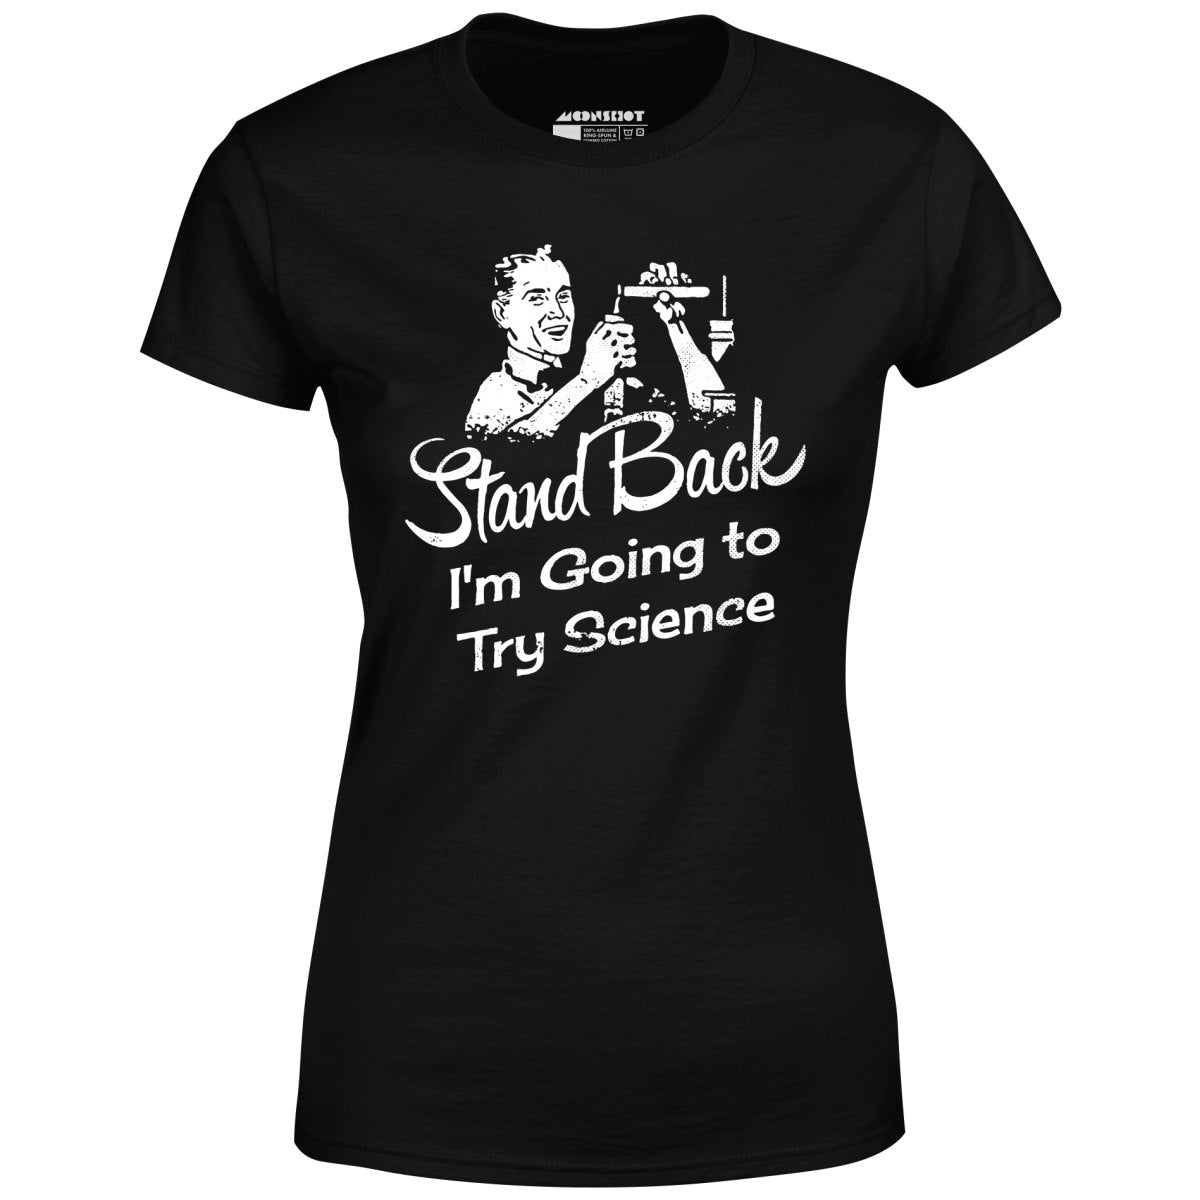 Stand Back I'm Going to Try Science - Women's T-Shirt